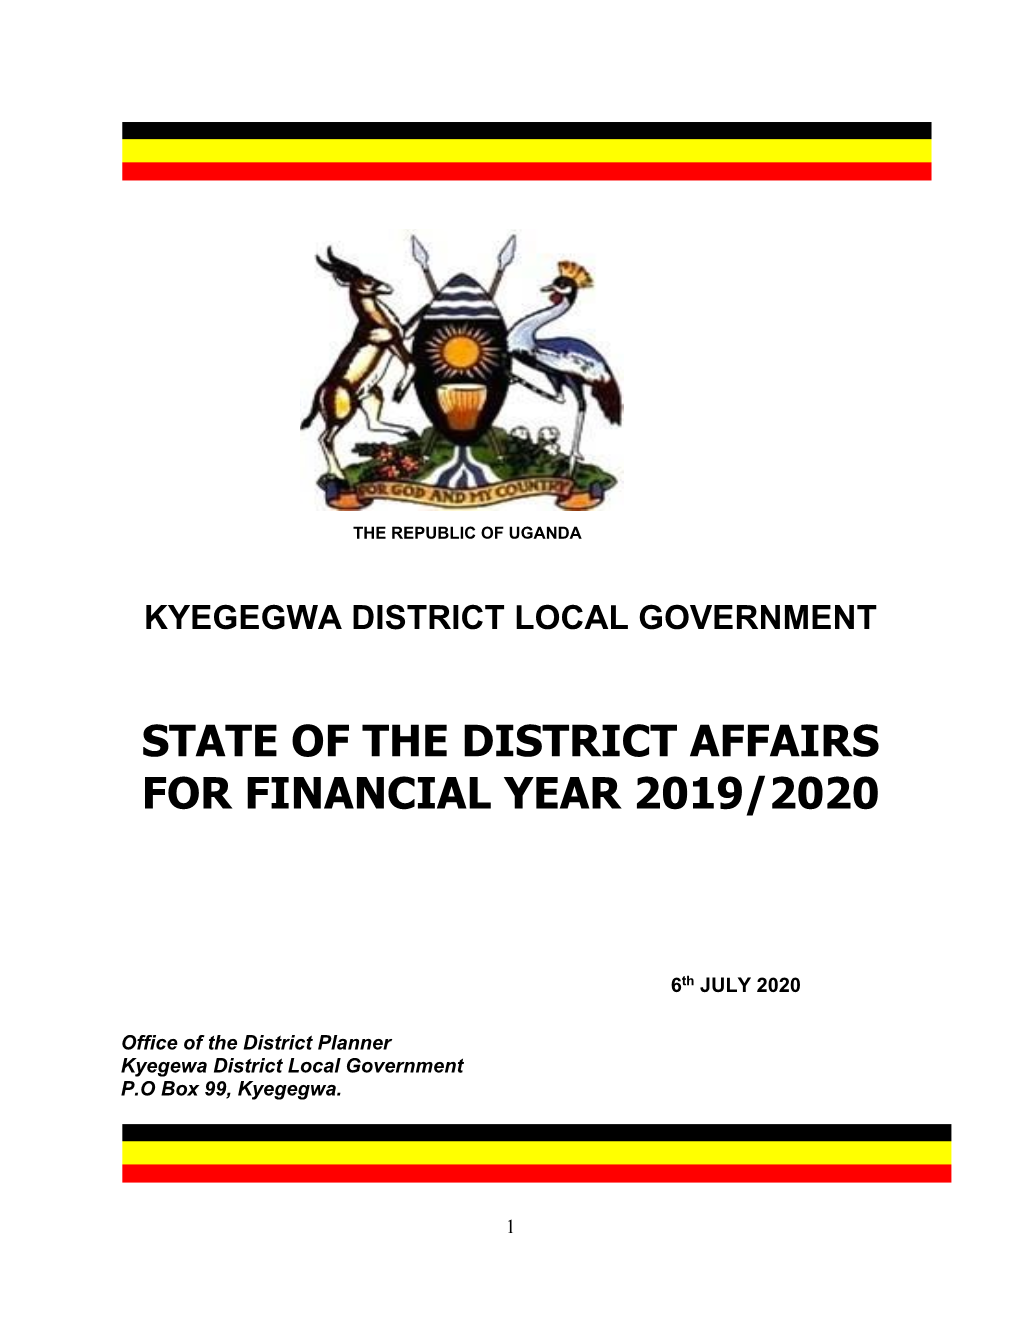 State of the District Affairs for Financial Year 2019/2020